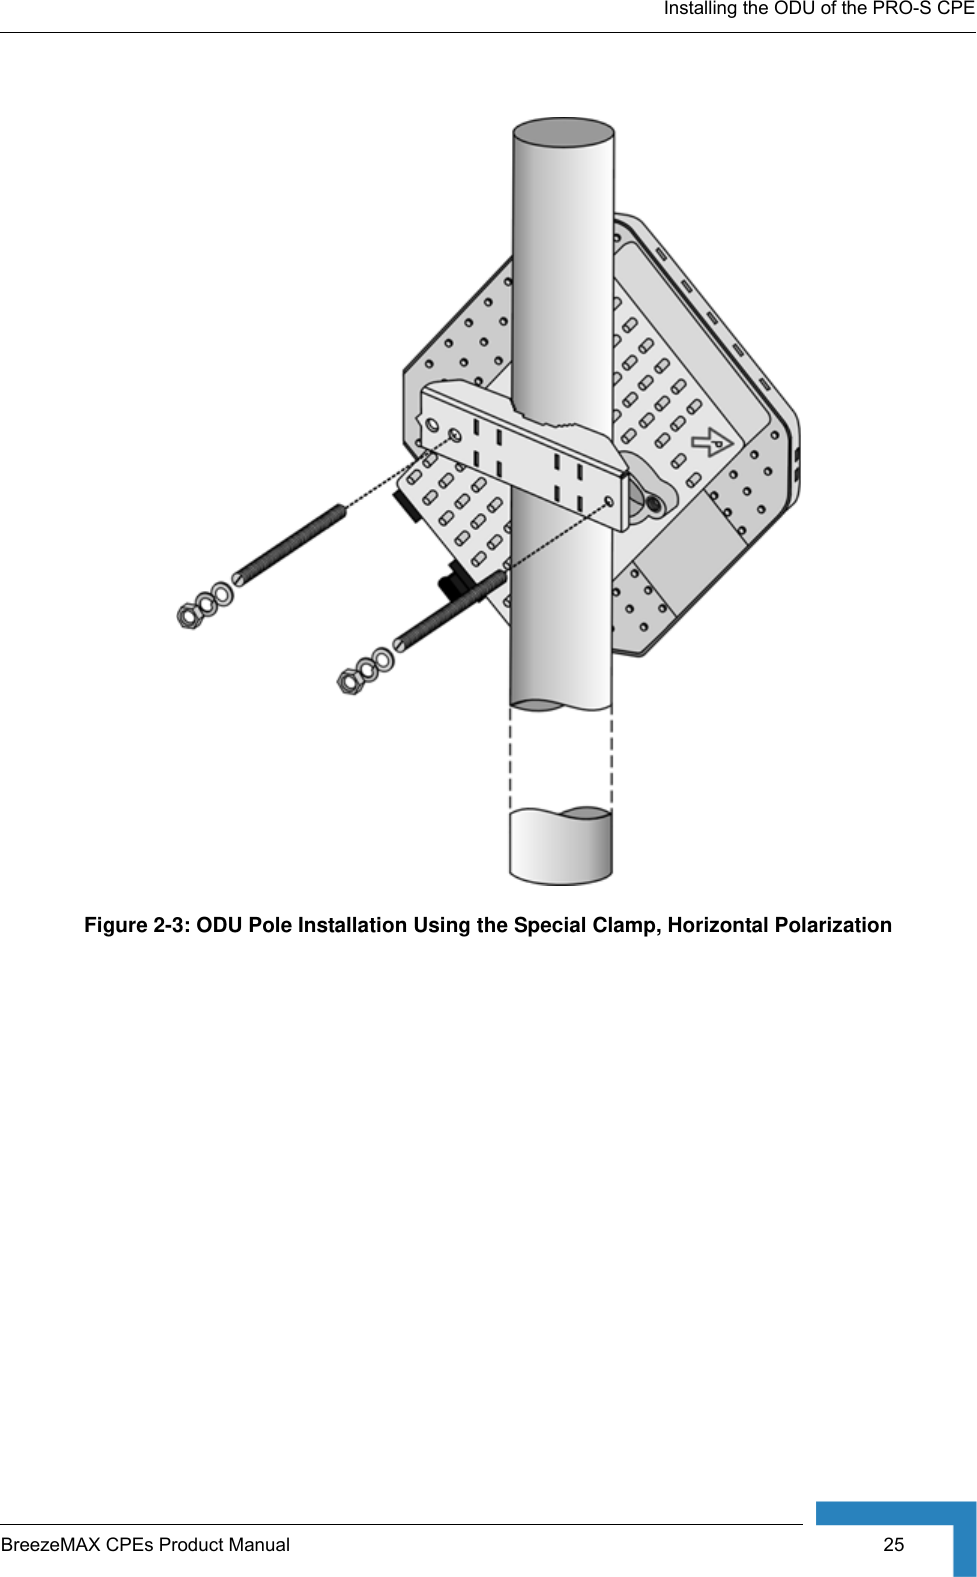 Installing the ODU of the PRO-S CPEBreezeMAX CPEs Product Manual  25Figure 2-3: ODU Pole Installation Using the Special Clamp, Horizontal Polarization